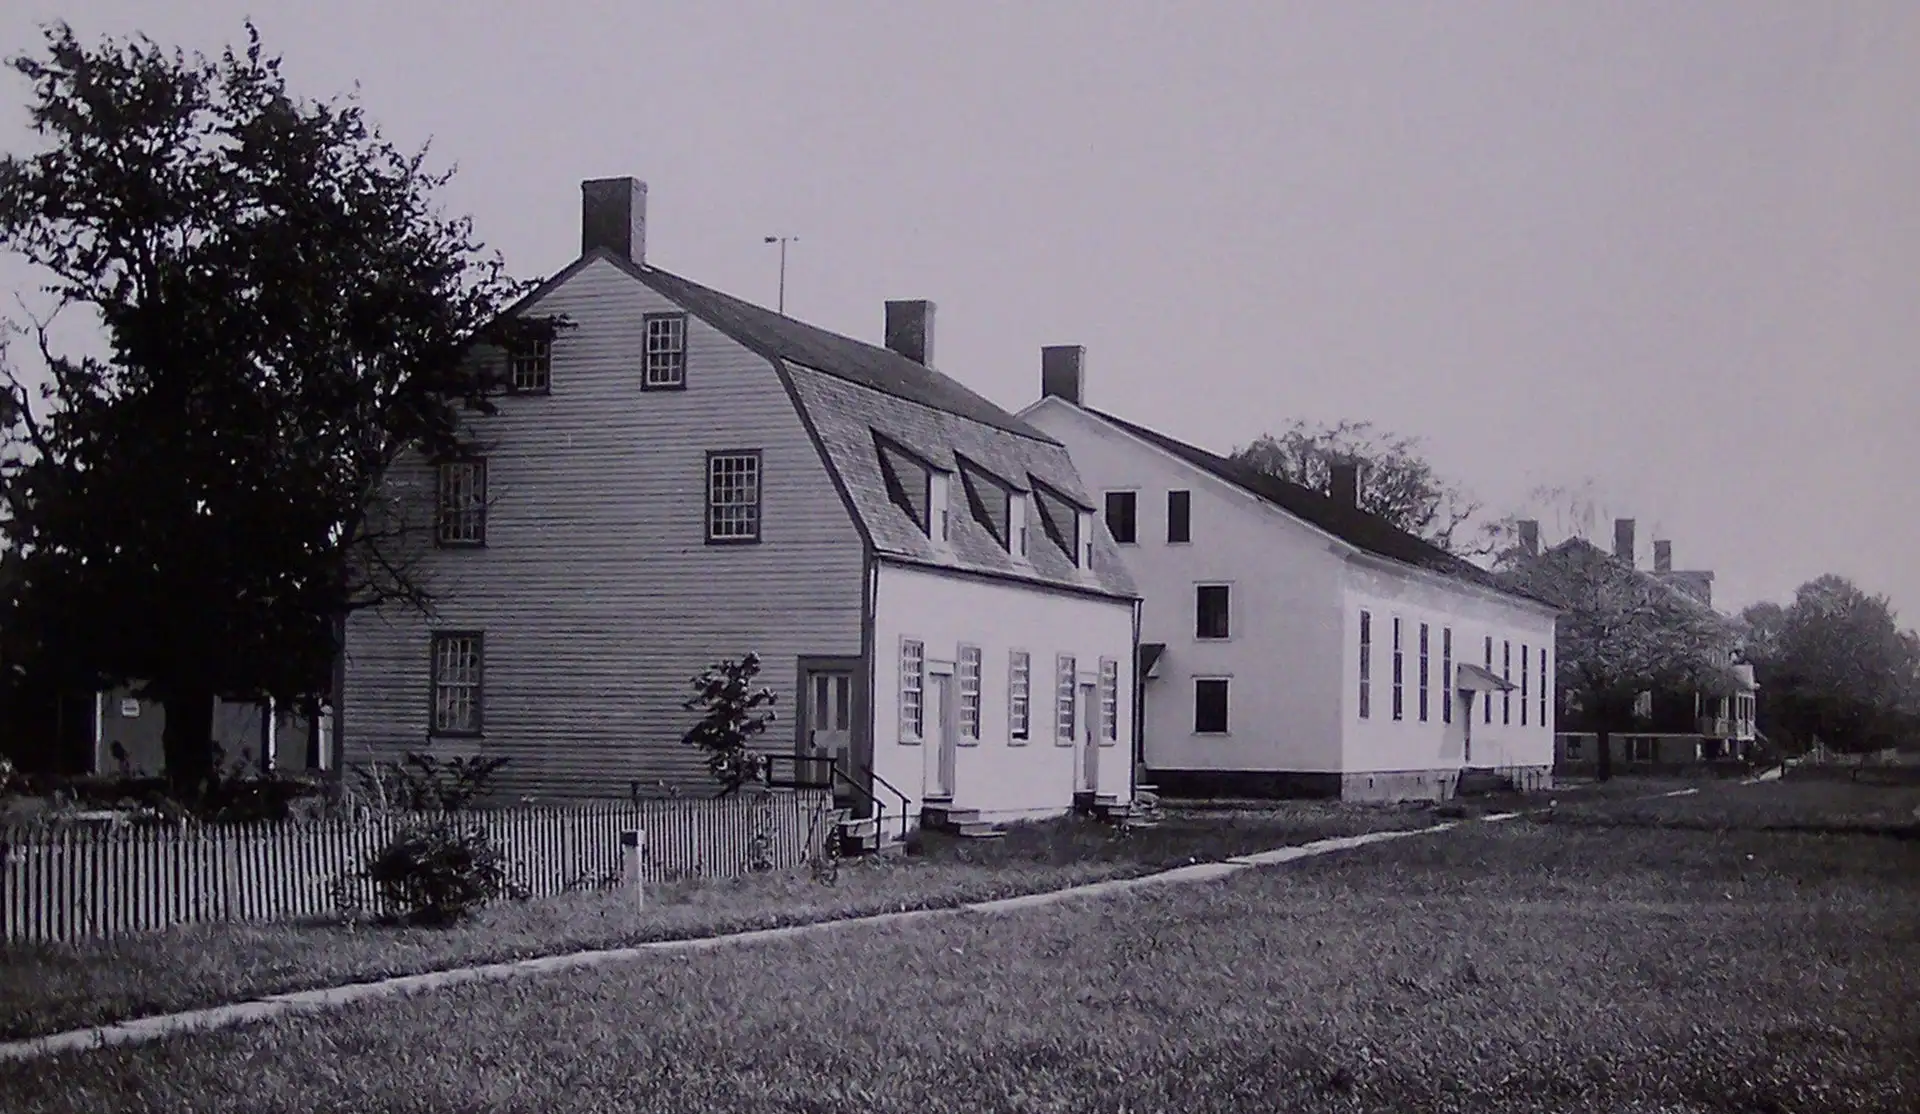 1791 and 1848 Meeting Houses